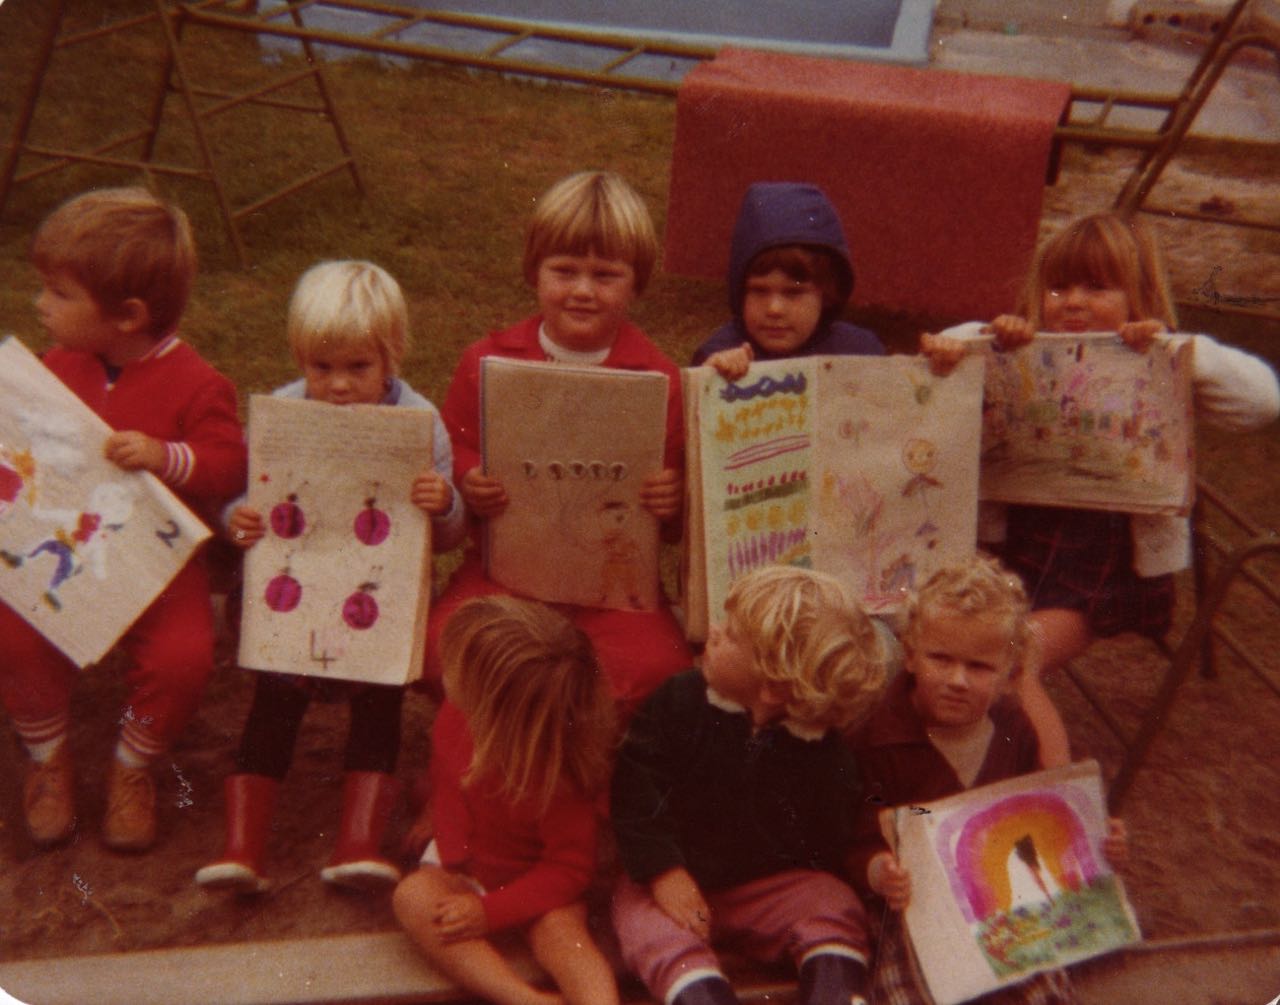 For a couple of years, Mom ran a Play-Group from our home. I loved it! - and I especially loved it when it was time to draw! (I'm the one on the far right)...